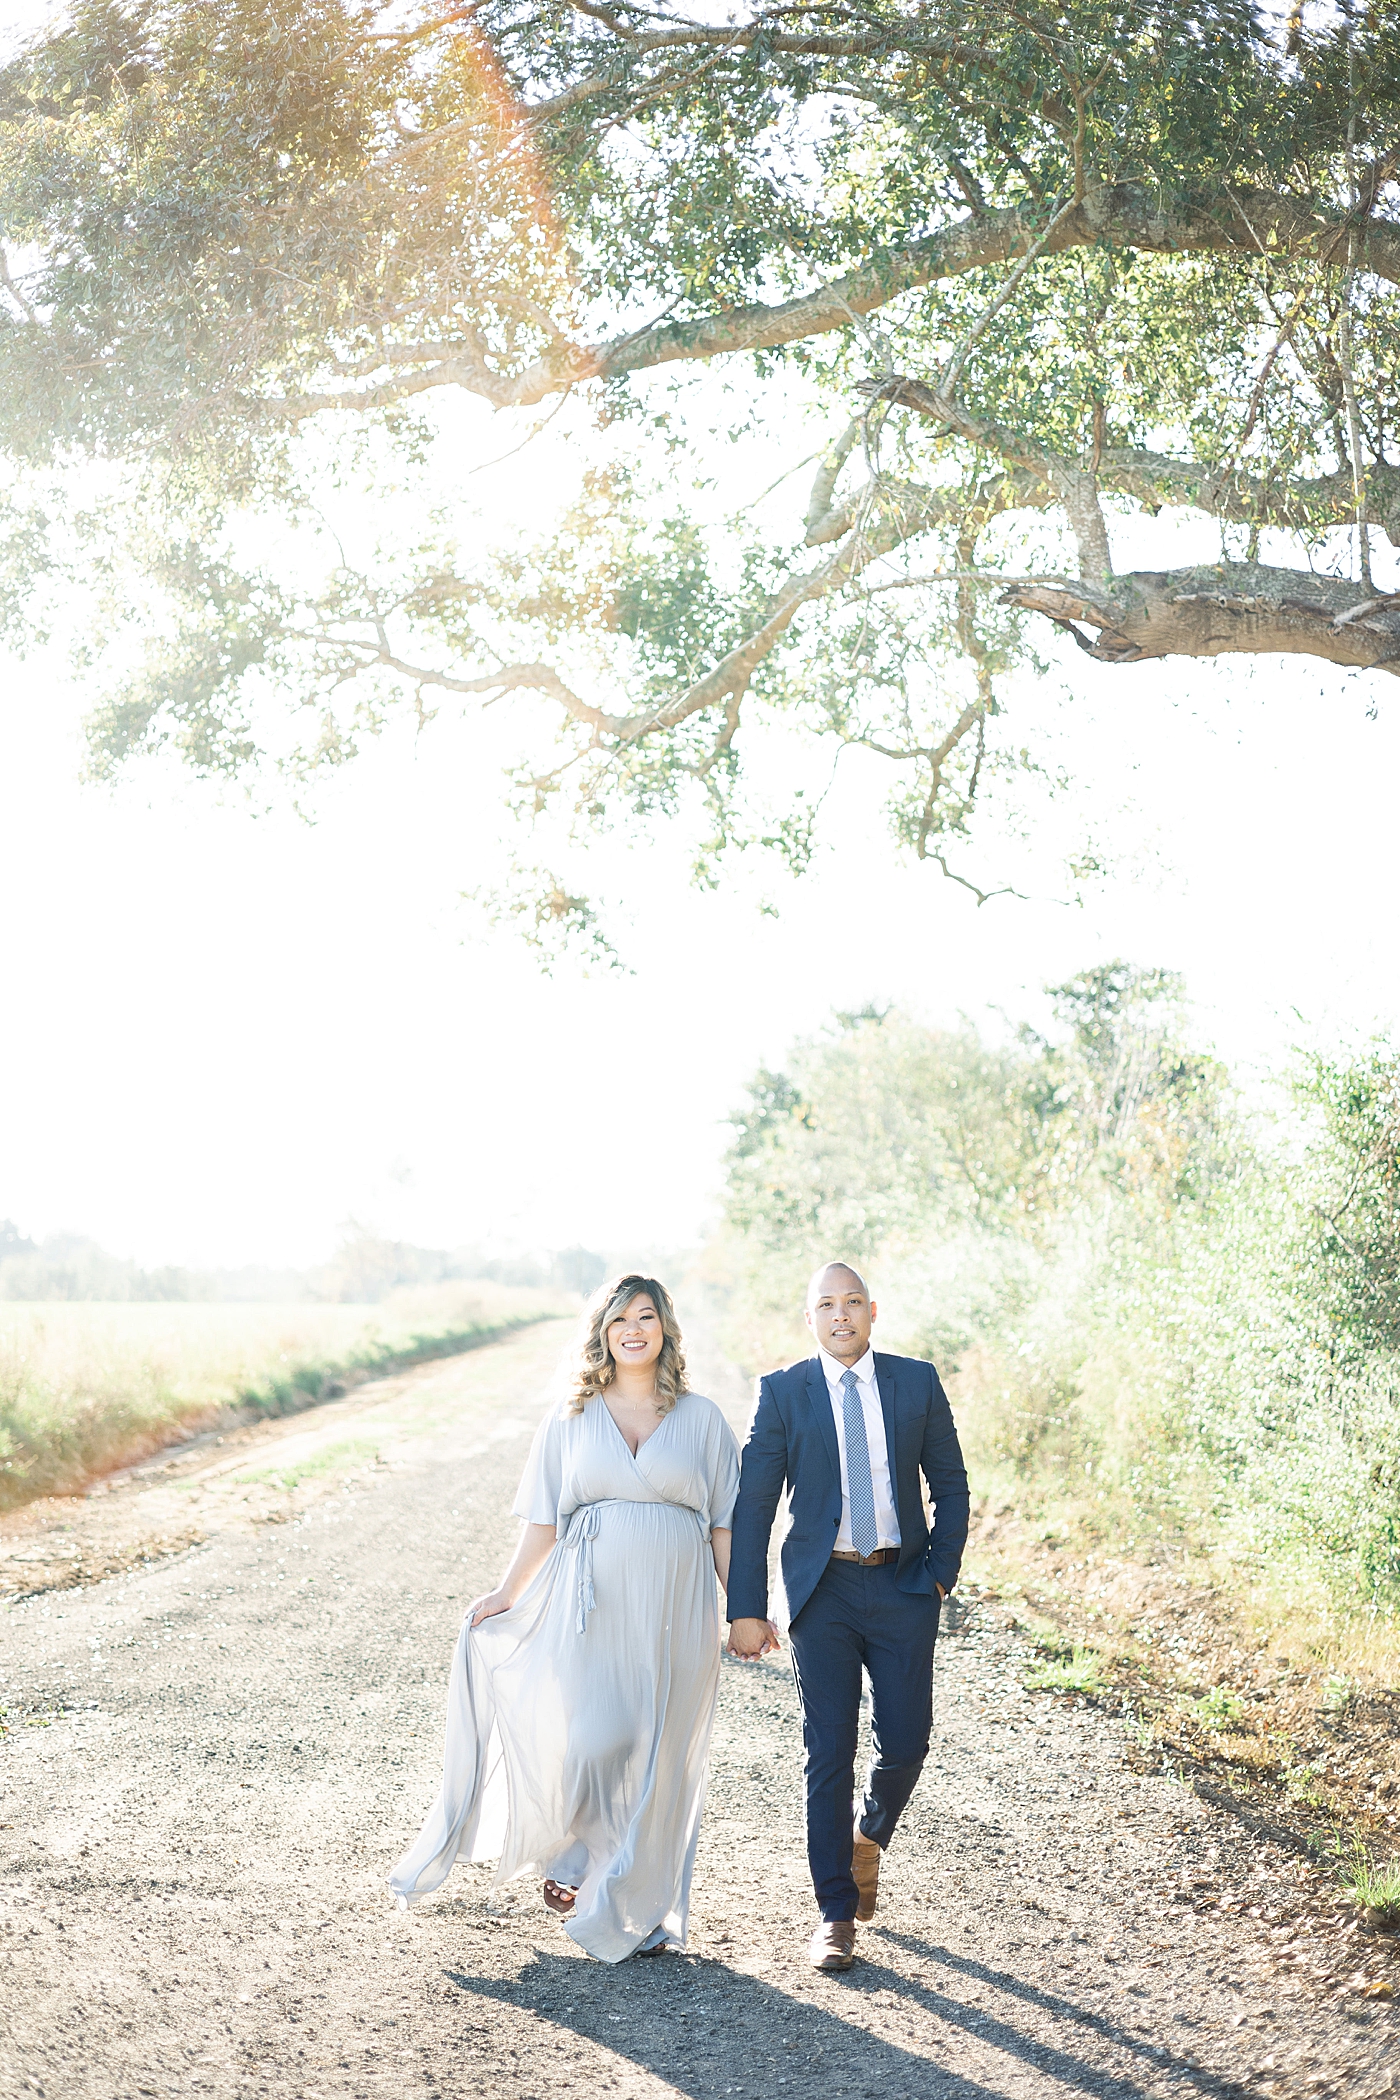 Mom and dad walking down a path holding hands | Photo by Gulfport MS Maternity and Newborn Photographer Little Sunshine Photography 